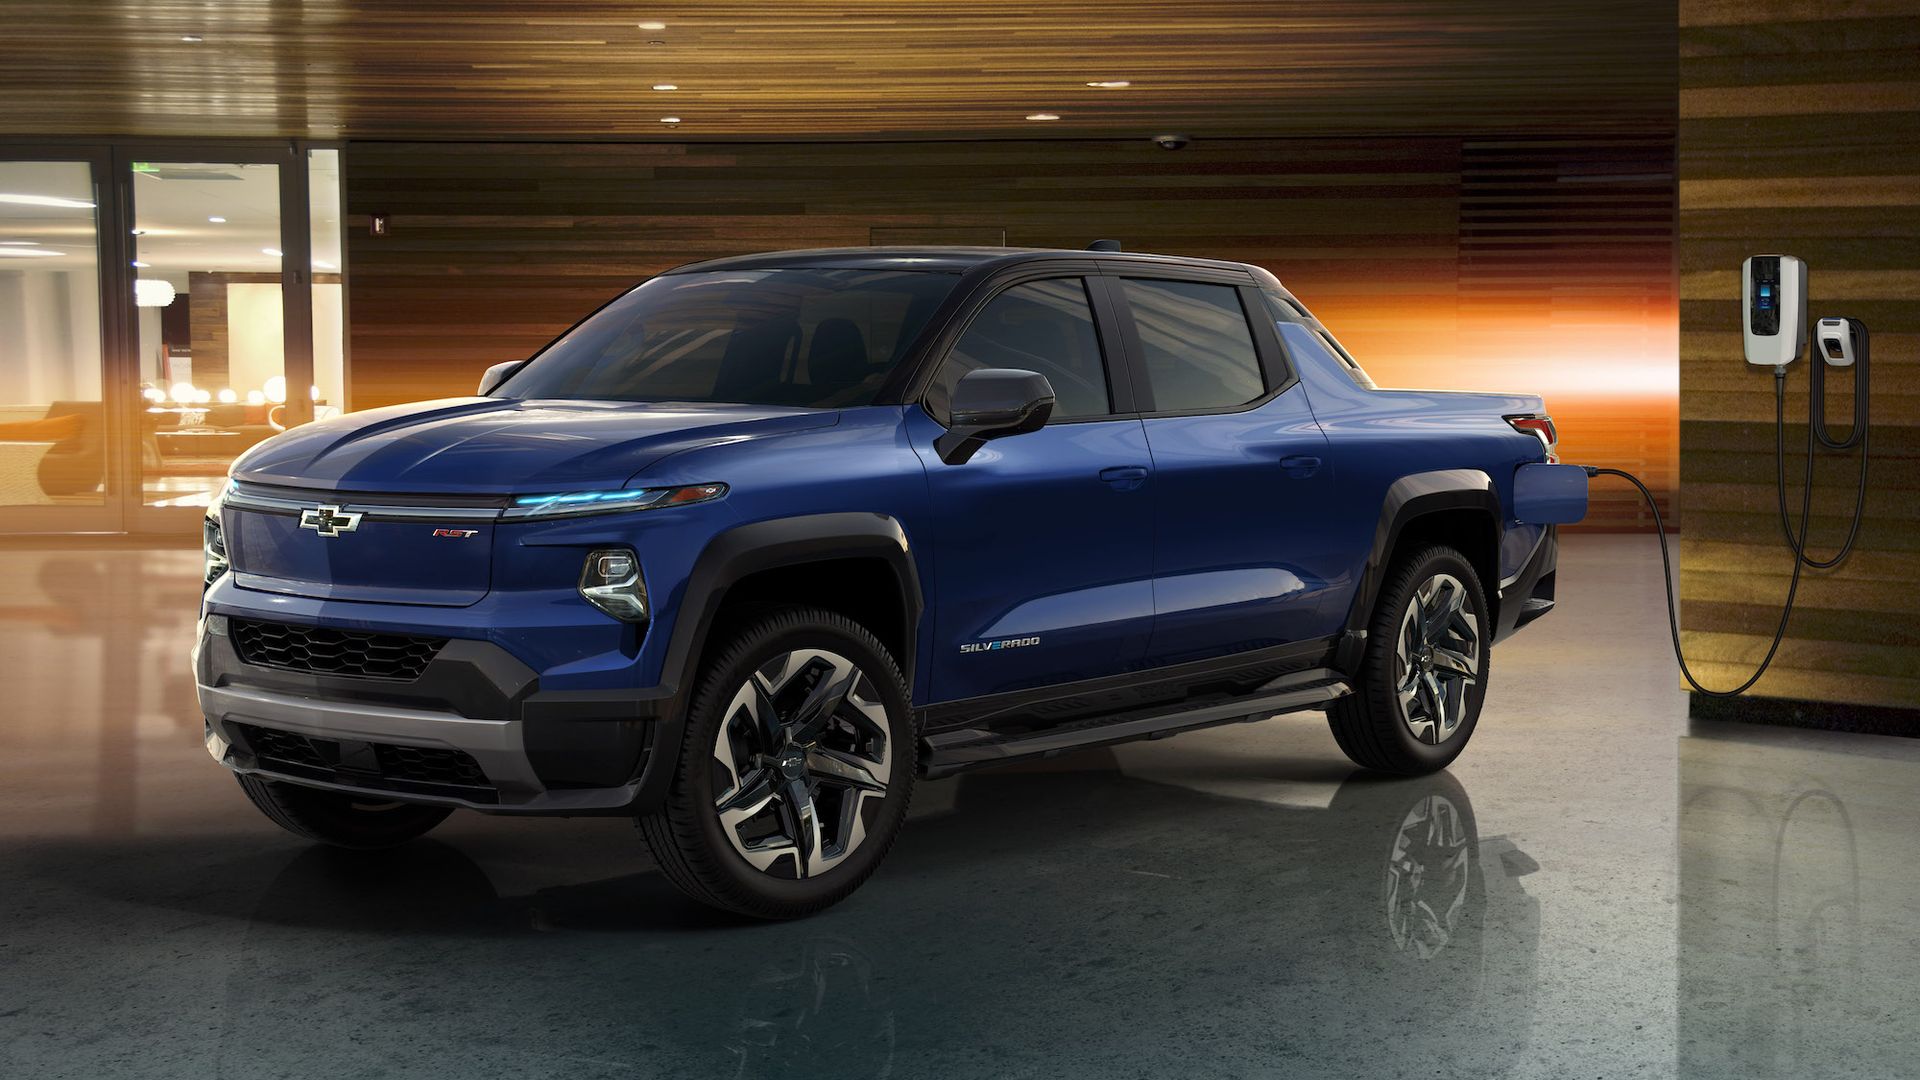 Photo of the new electric Chevy Silverado pickup